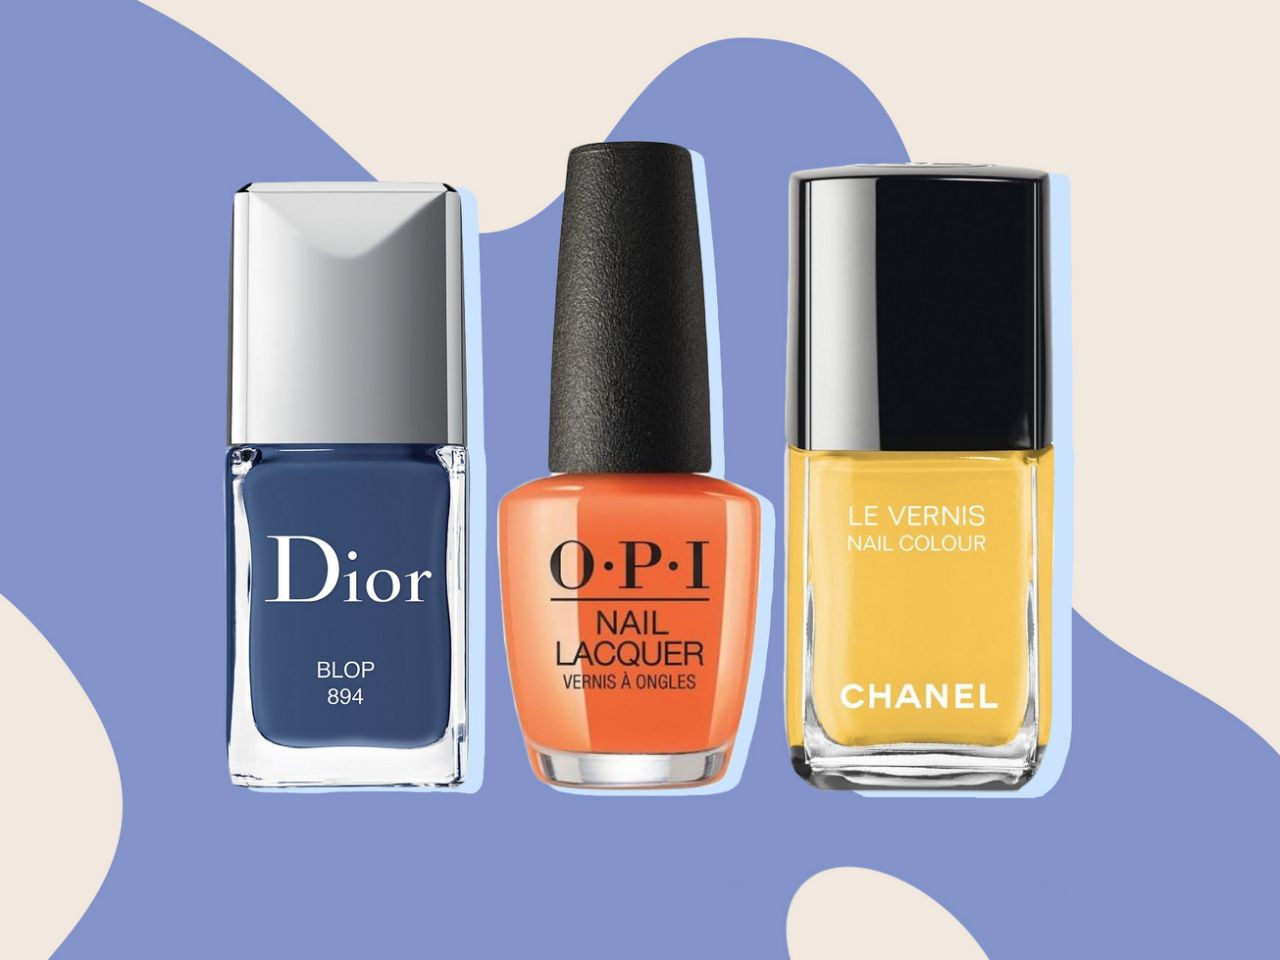 Good Summer Nail Colors
 The Best Nail Polish Colors for Summer 2018